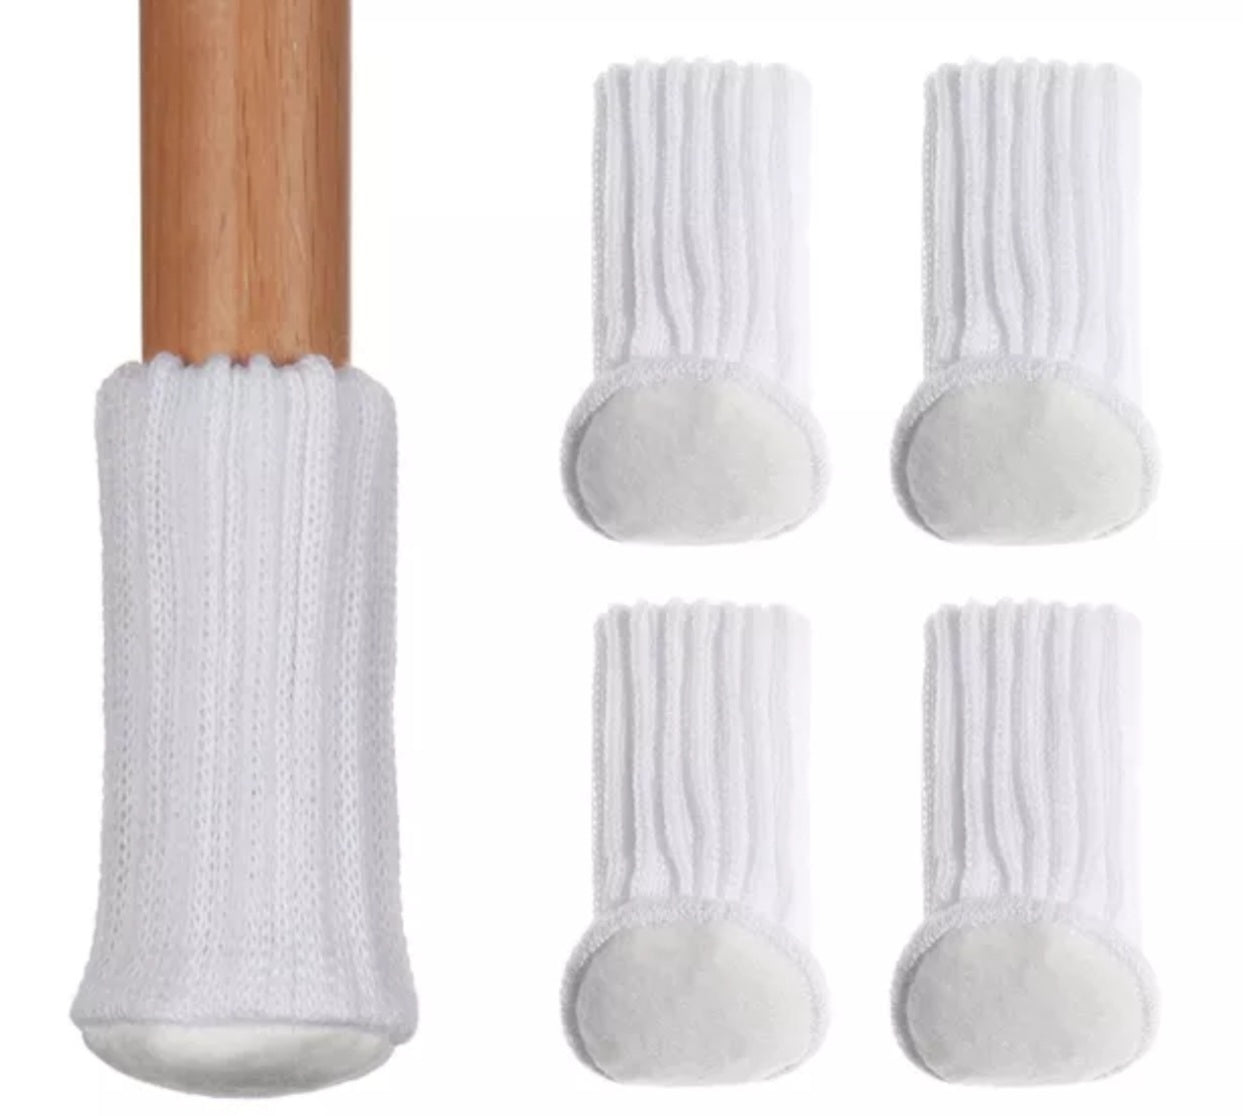 Chair and table leg socks scratch protection plain colour set of 4